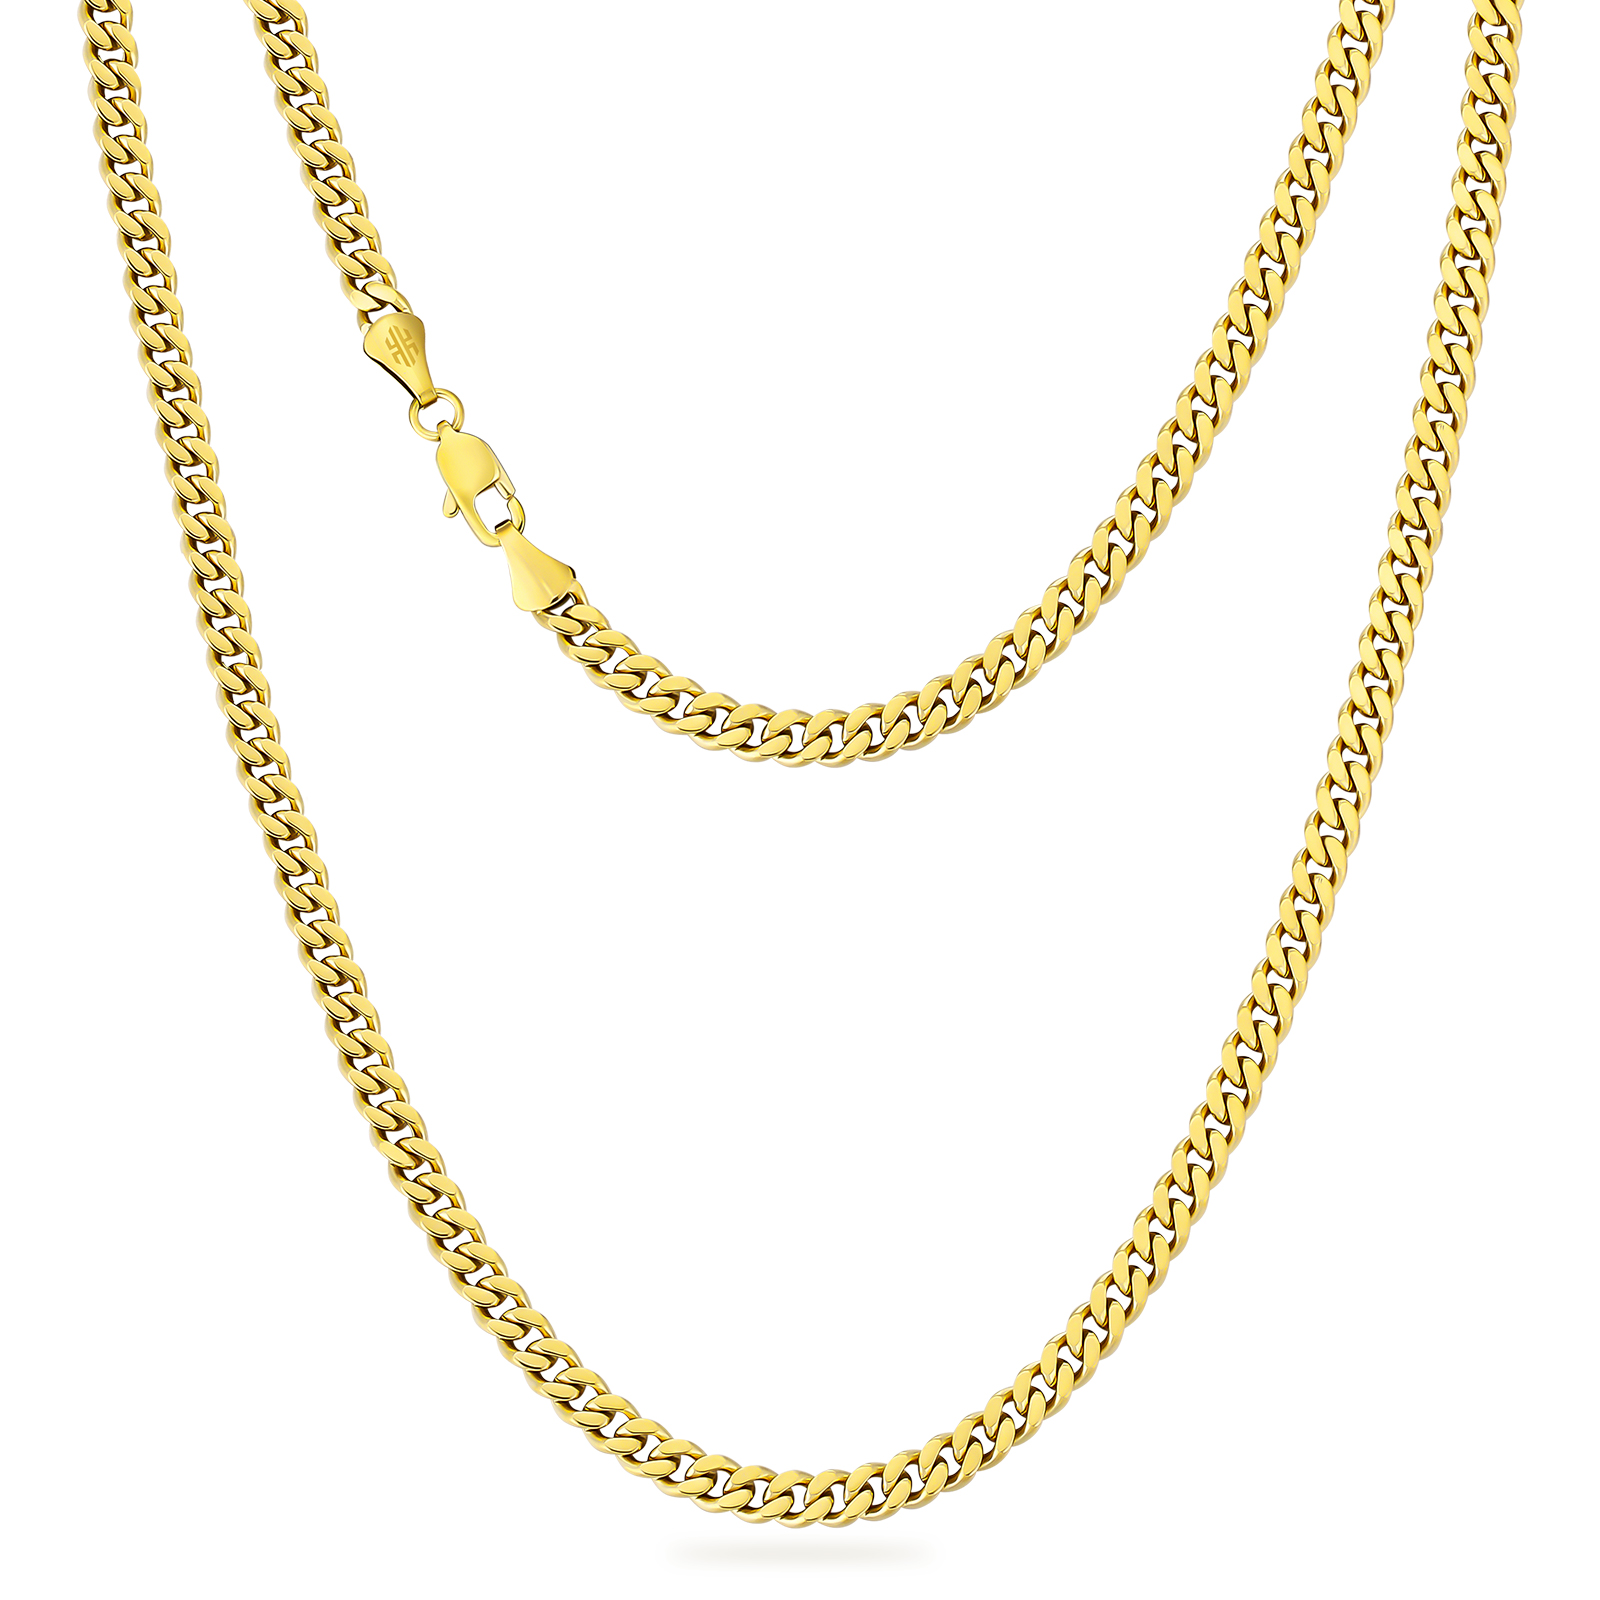 【NEW】14k 喜平 ネックレス メンズ 幅3mm/4mm/5mm/6mm/8mm curb chain hiphop jewelry KRKC